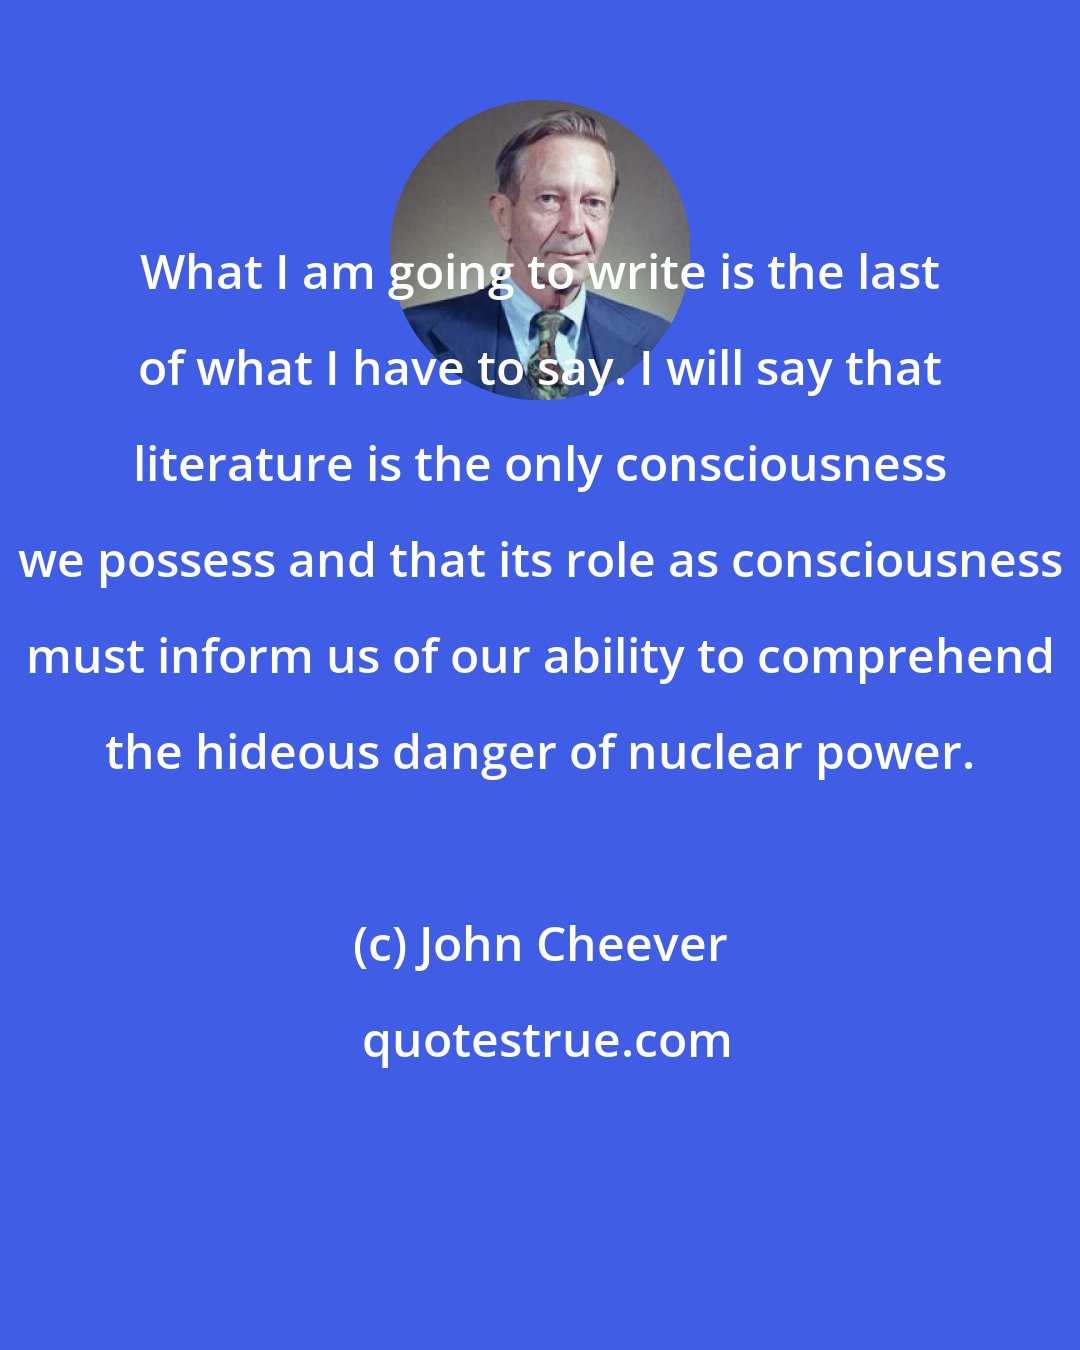 John Cheever: What I am going to write is the last of what I have to say. I will say that literature is the only consciousness we possess and that its role as consciousness must inform us of our ability to comprehend the hideous danger of nuclear power.